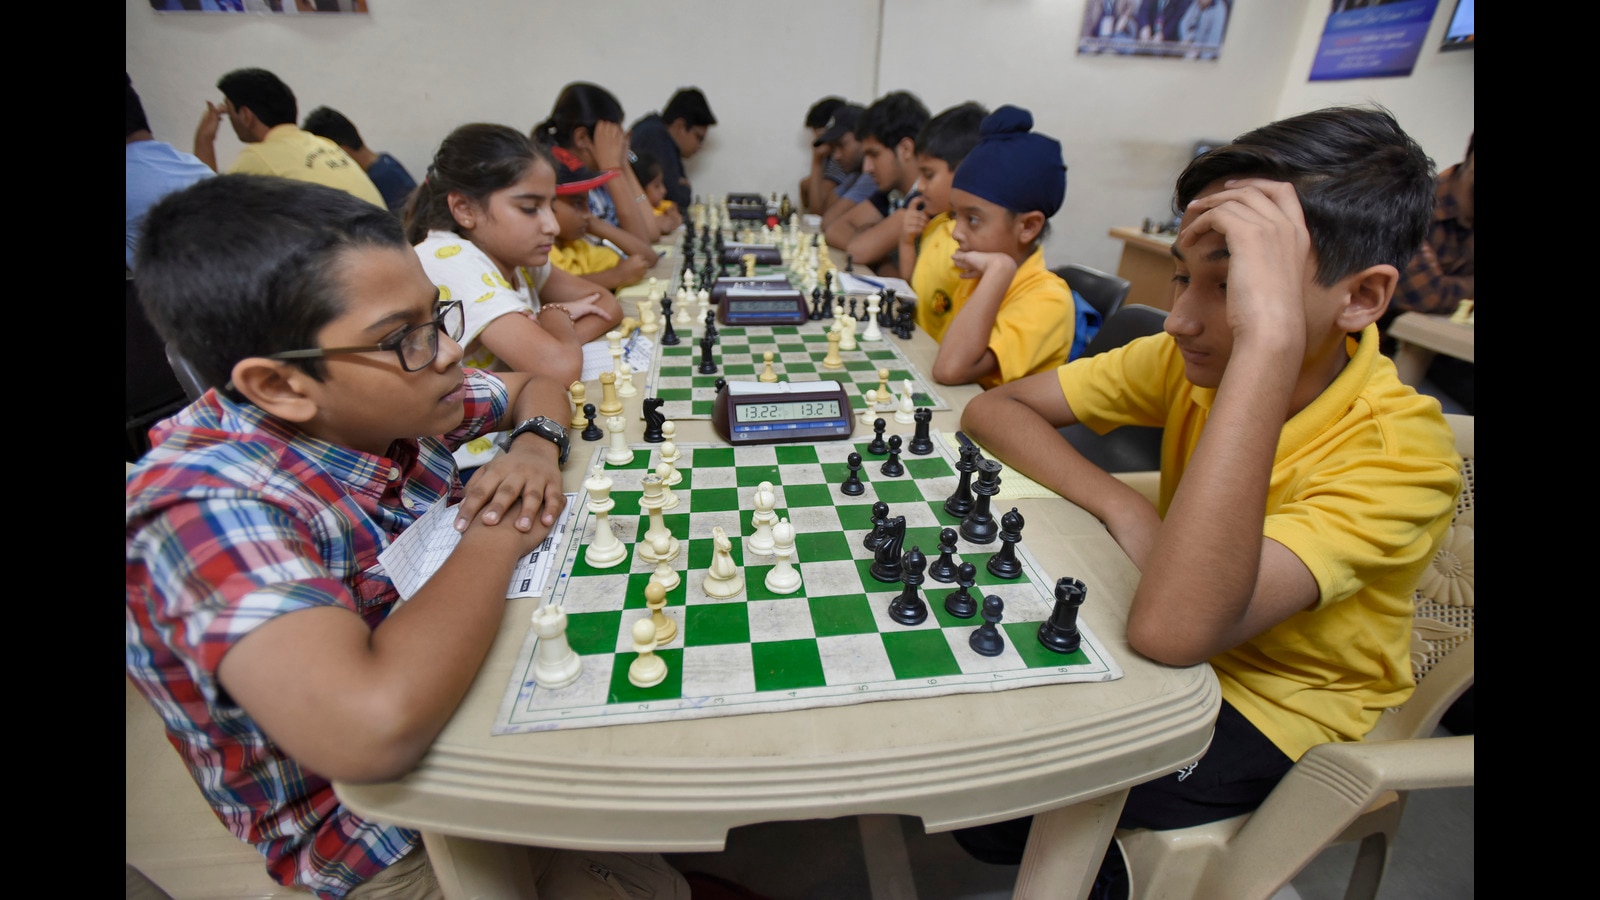 Hindustan Times - On the occasion of #WorldChessDay, meet